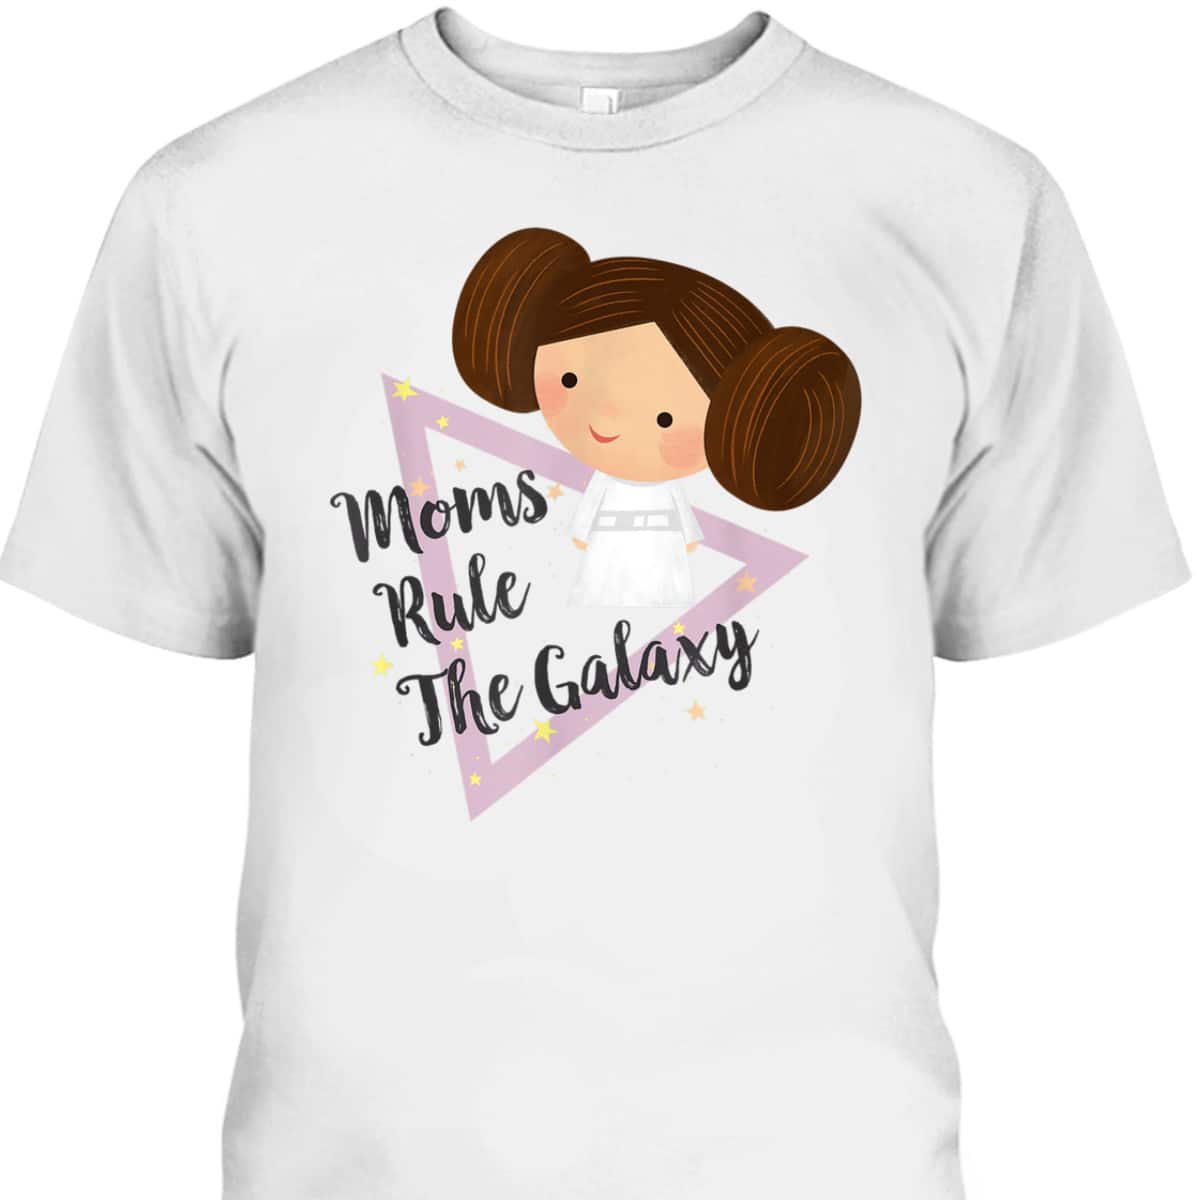 Mother's Day T-Shirt Star Wars Princess Leia Moms Rule The Galaxy